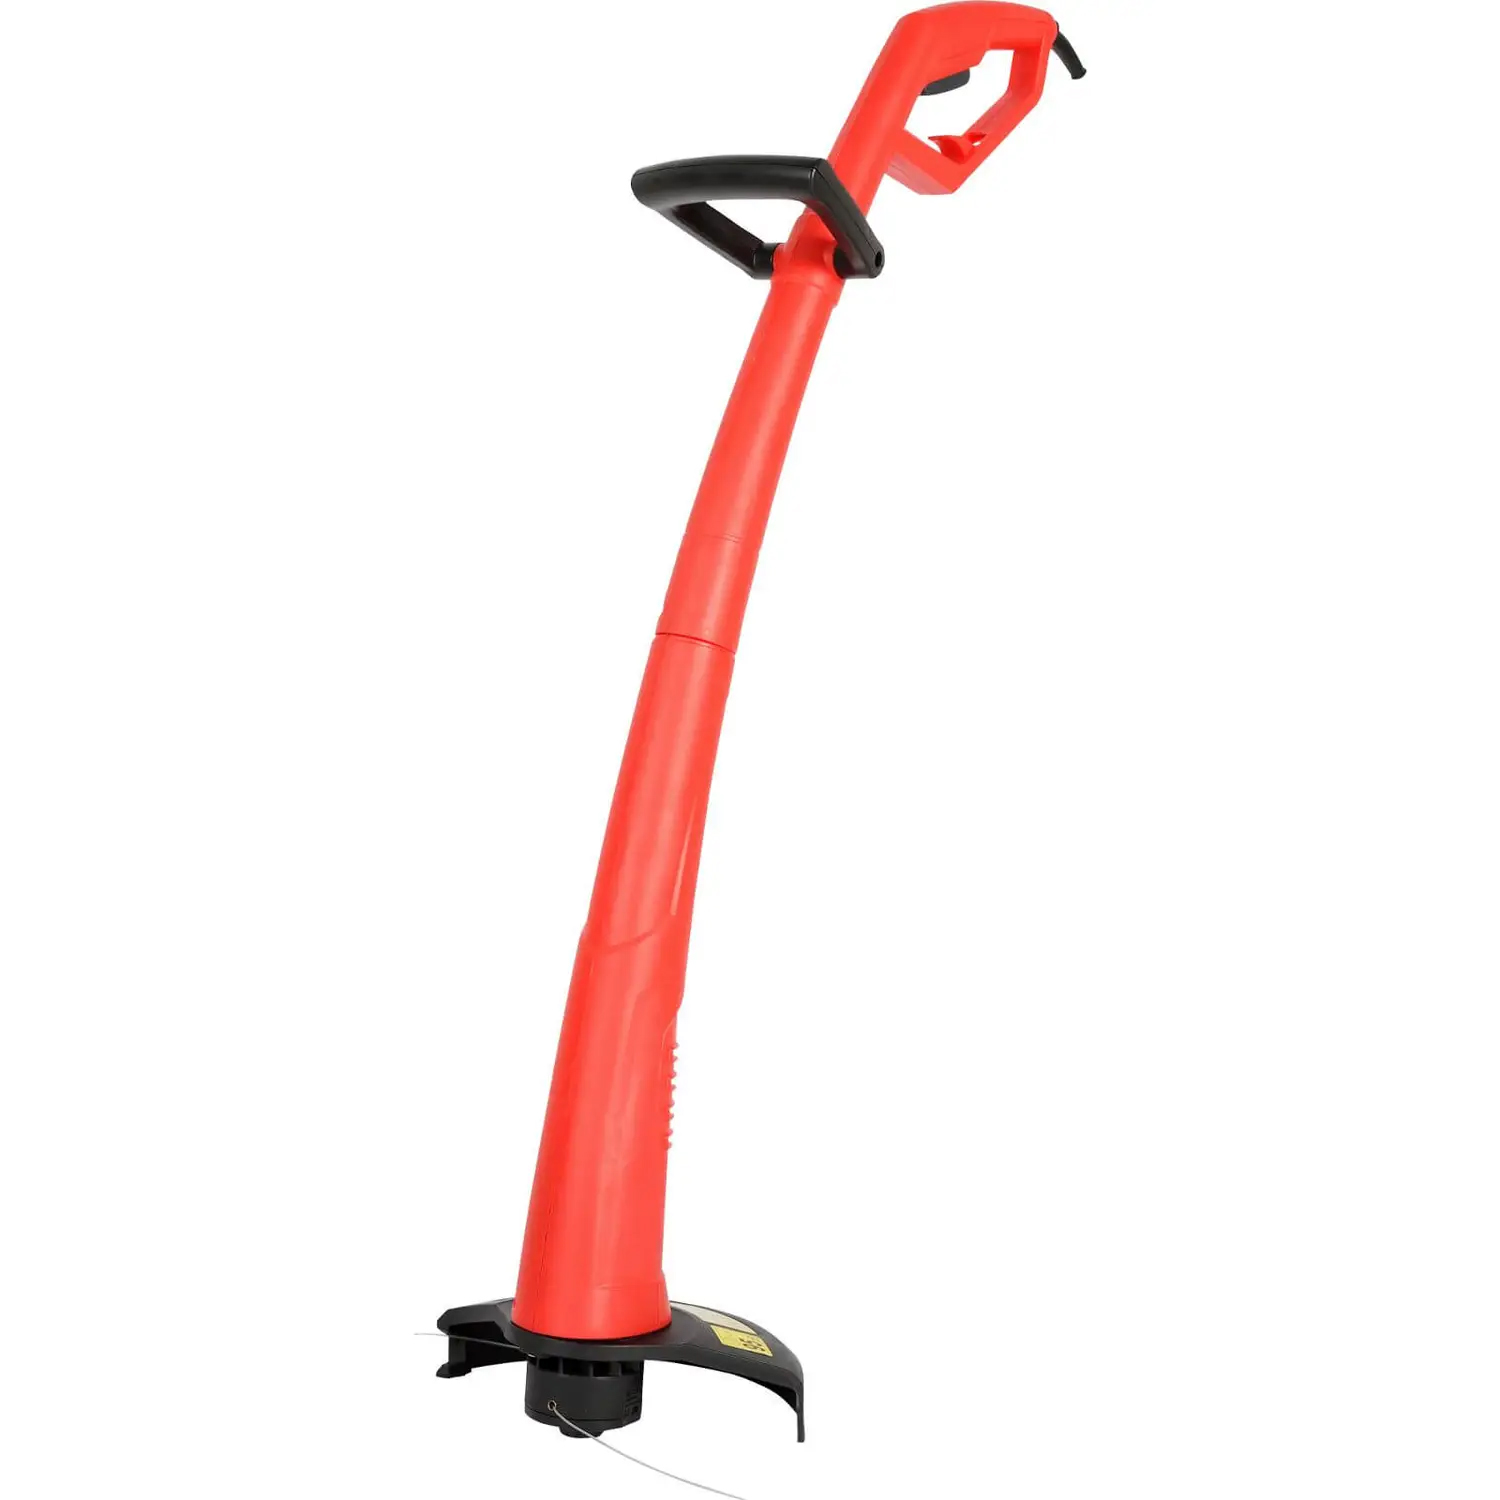 Homebase sell the Sovereign 250W Electric Grass Trimmer 22cm at £17.50.